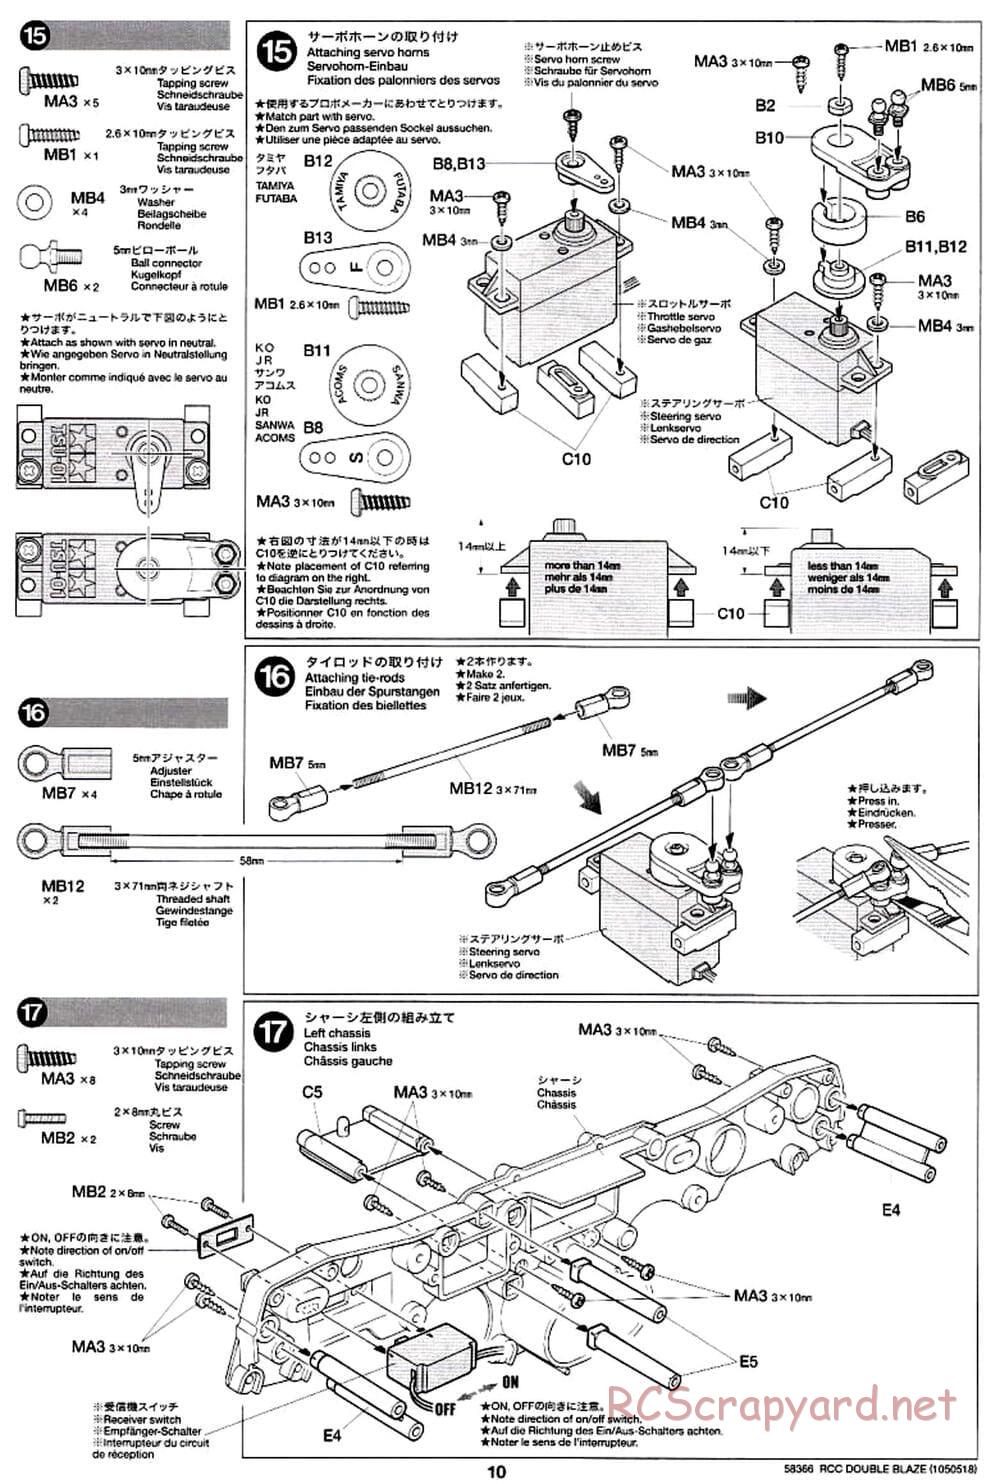 Tamiya - Double Blaze - WR-01 Chassis - Manual - Page 10